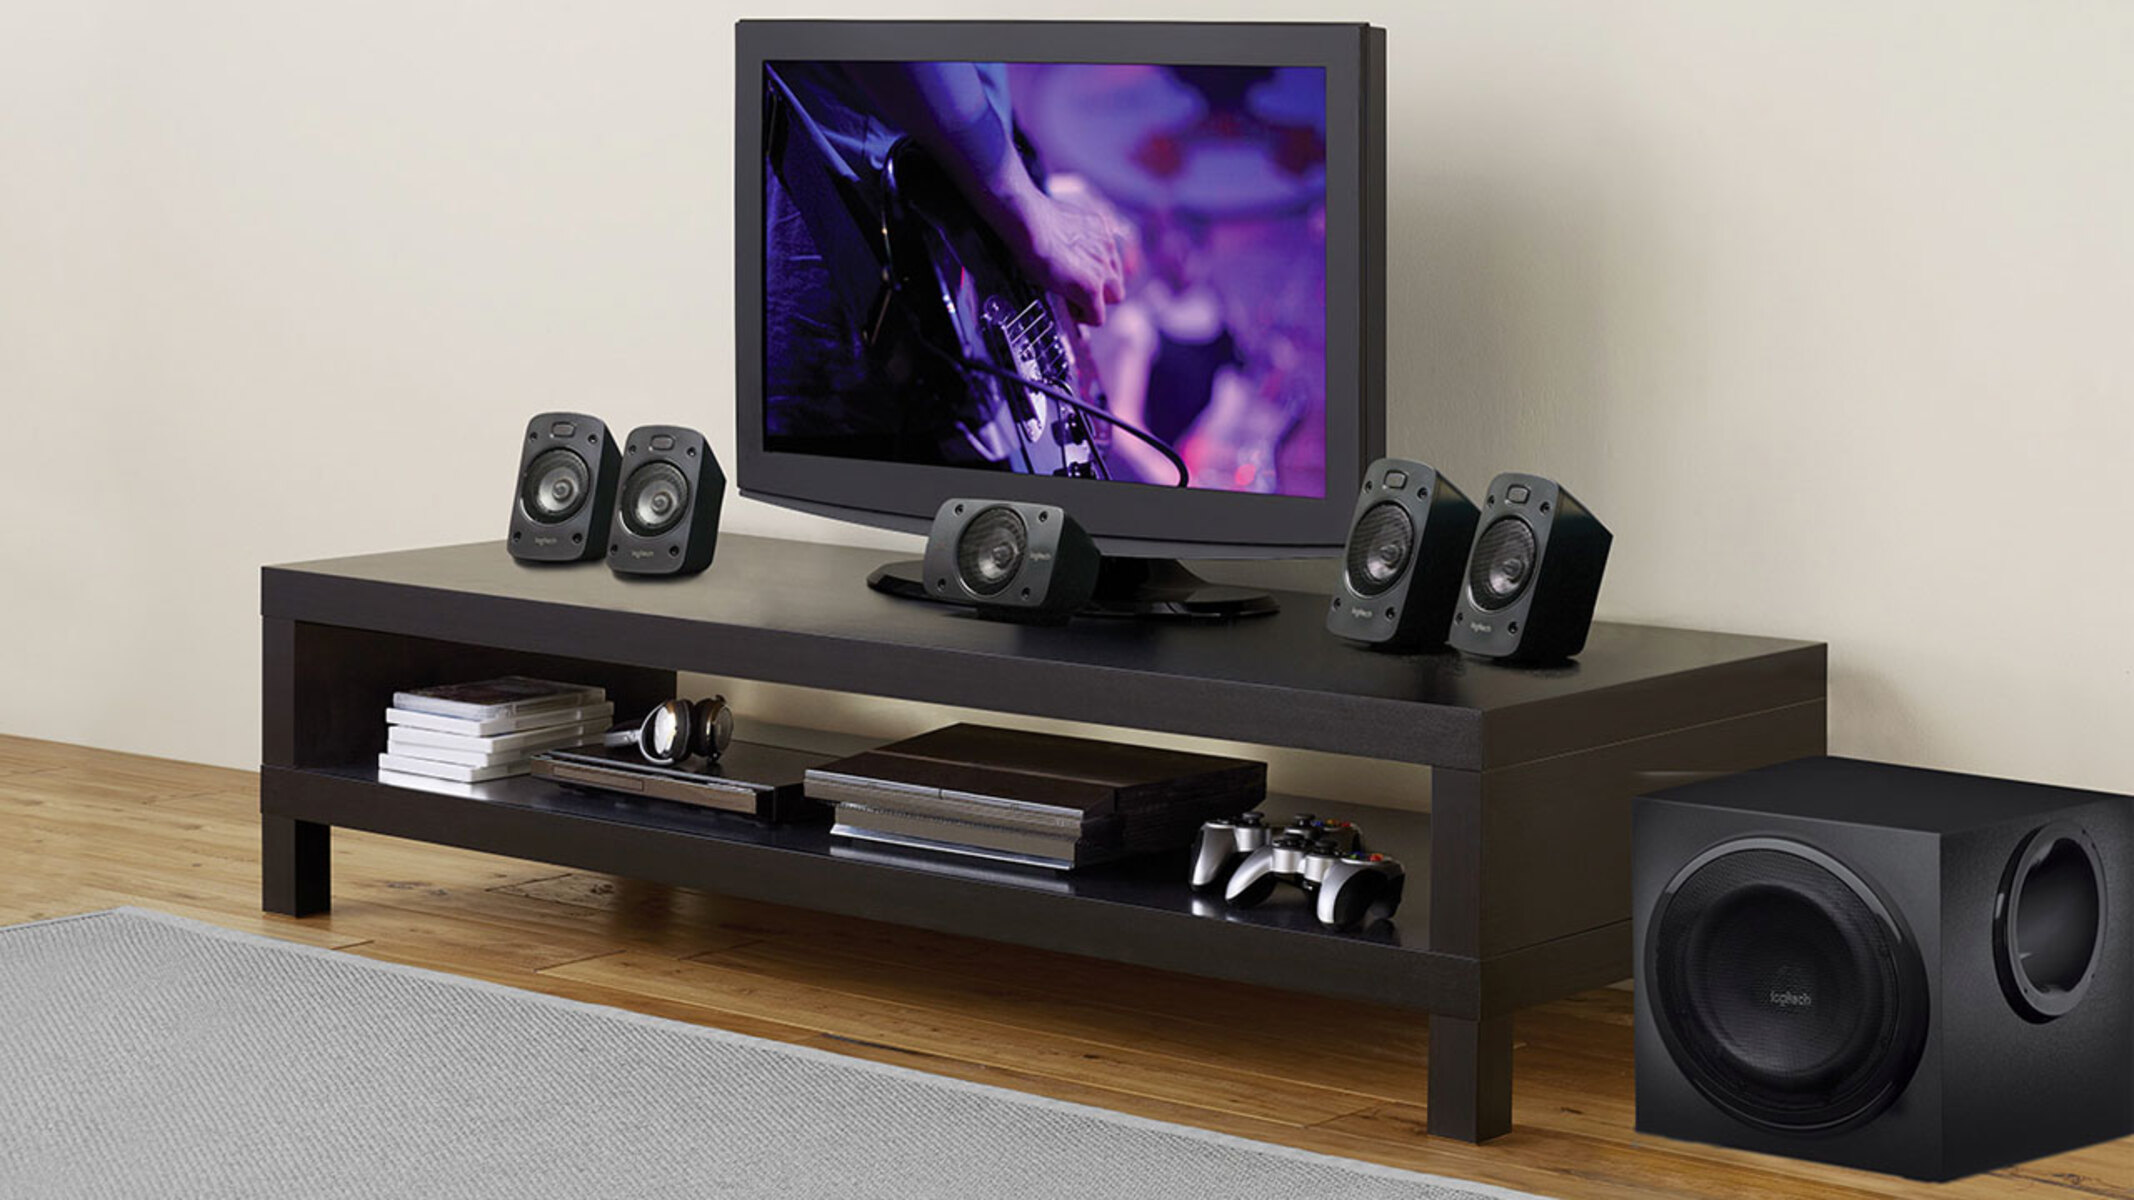 How To Hook Up A Logitech Surround Sound System